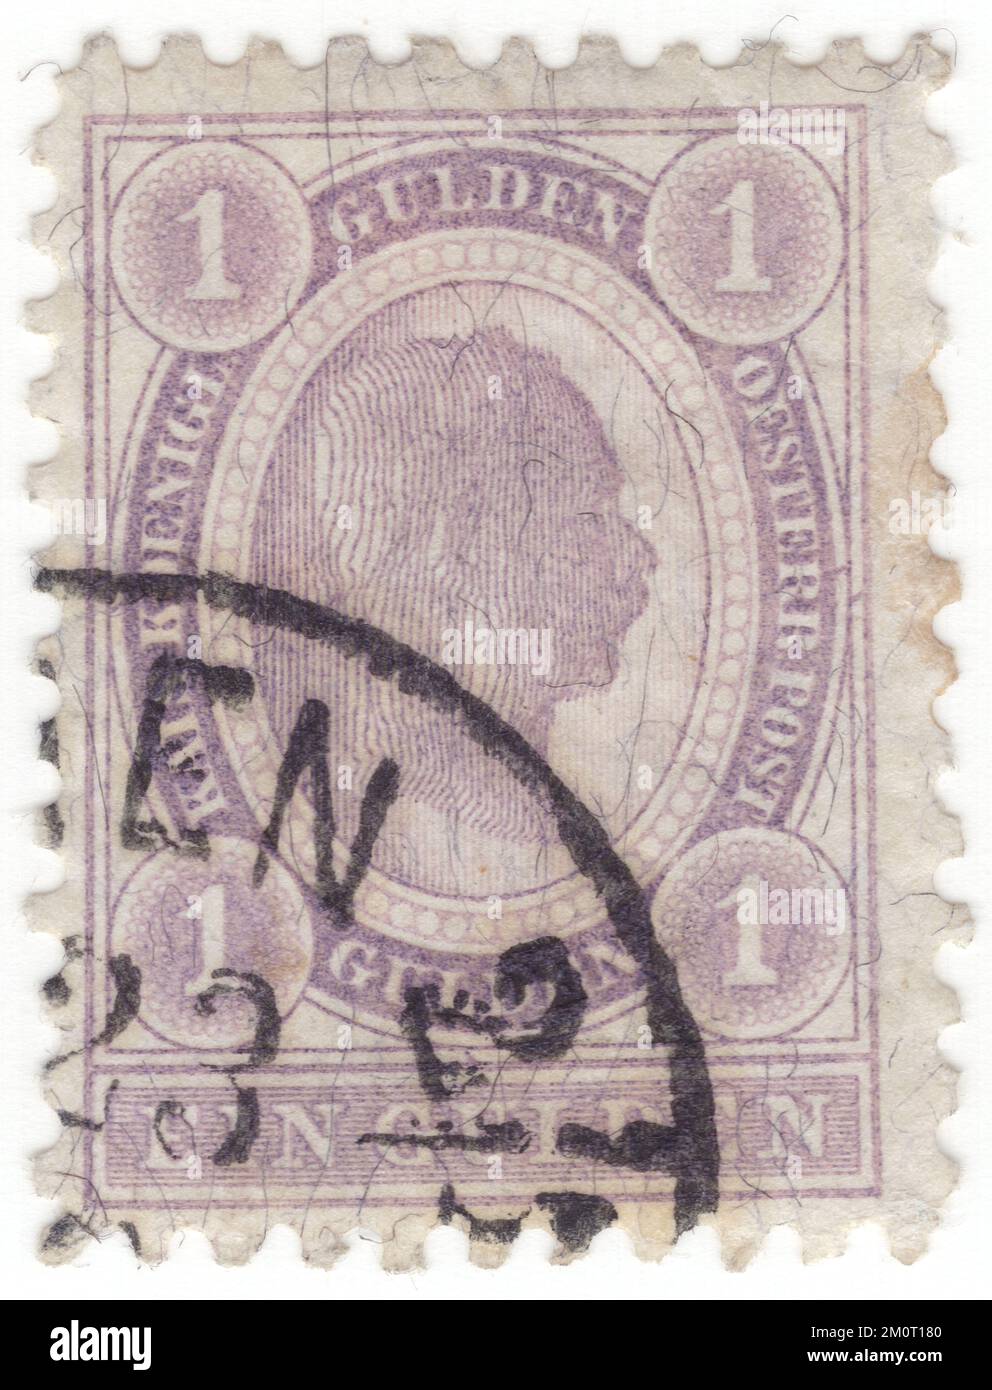 AUSTRIA — 1896: An 1 gulden pale lilac postage stamp depicting Embossed portrait of young Austrian Monarch Emperor Franz Josef. Franz Joseph I or Francis Joseph I was Emperor of Austria, King of Hungary, and the other states of the Habsburg monarchy from 2 December 1848 until his death on 21 November 1916. In the early part of his reign, his realms and territories were referred to as the Austrian Empire, but were reconstituted as the dual monarchy of the Austro-Hungarian Empire in 1867. From 1 May 1850 to 24 August 1866, Franz Joseph was also President of the German Confederation Stock Photo